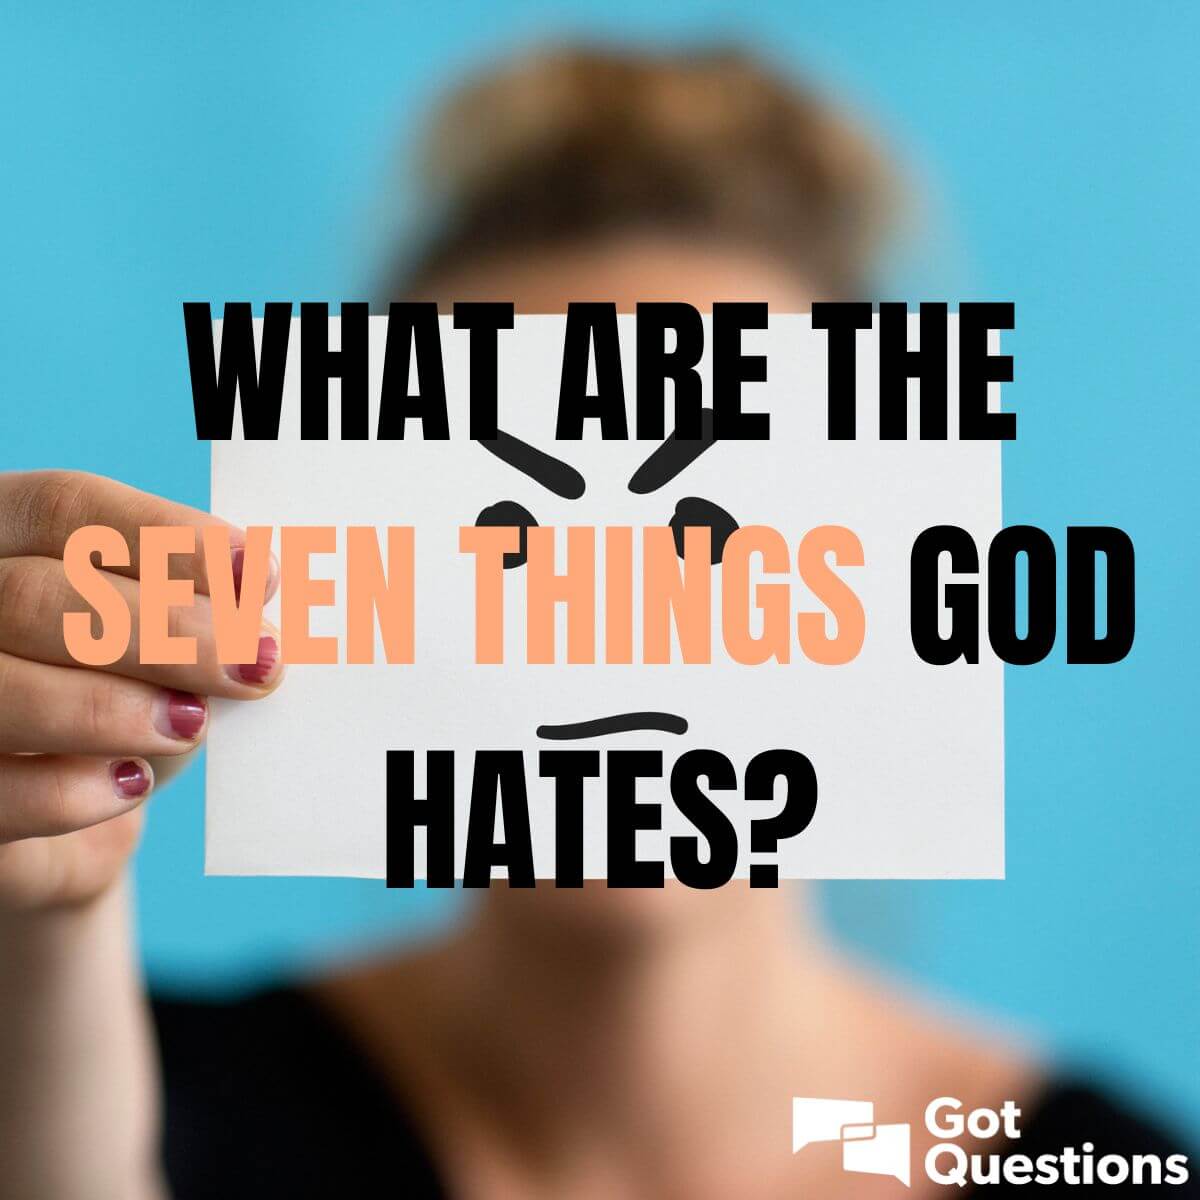 What Are The Seven Things God Hates